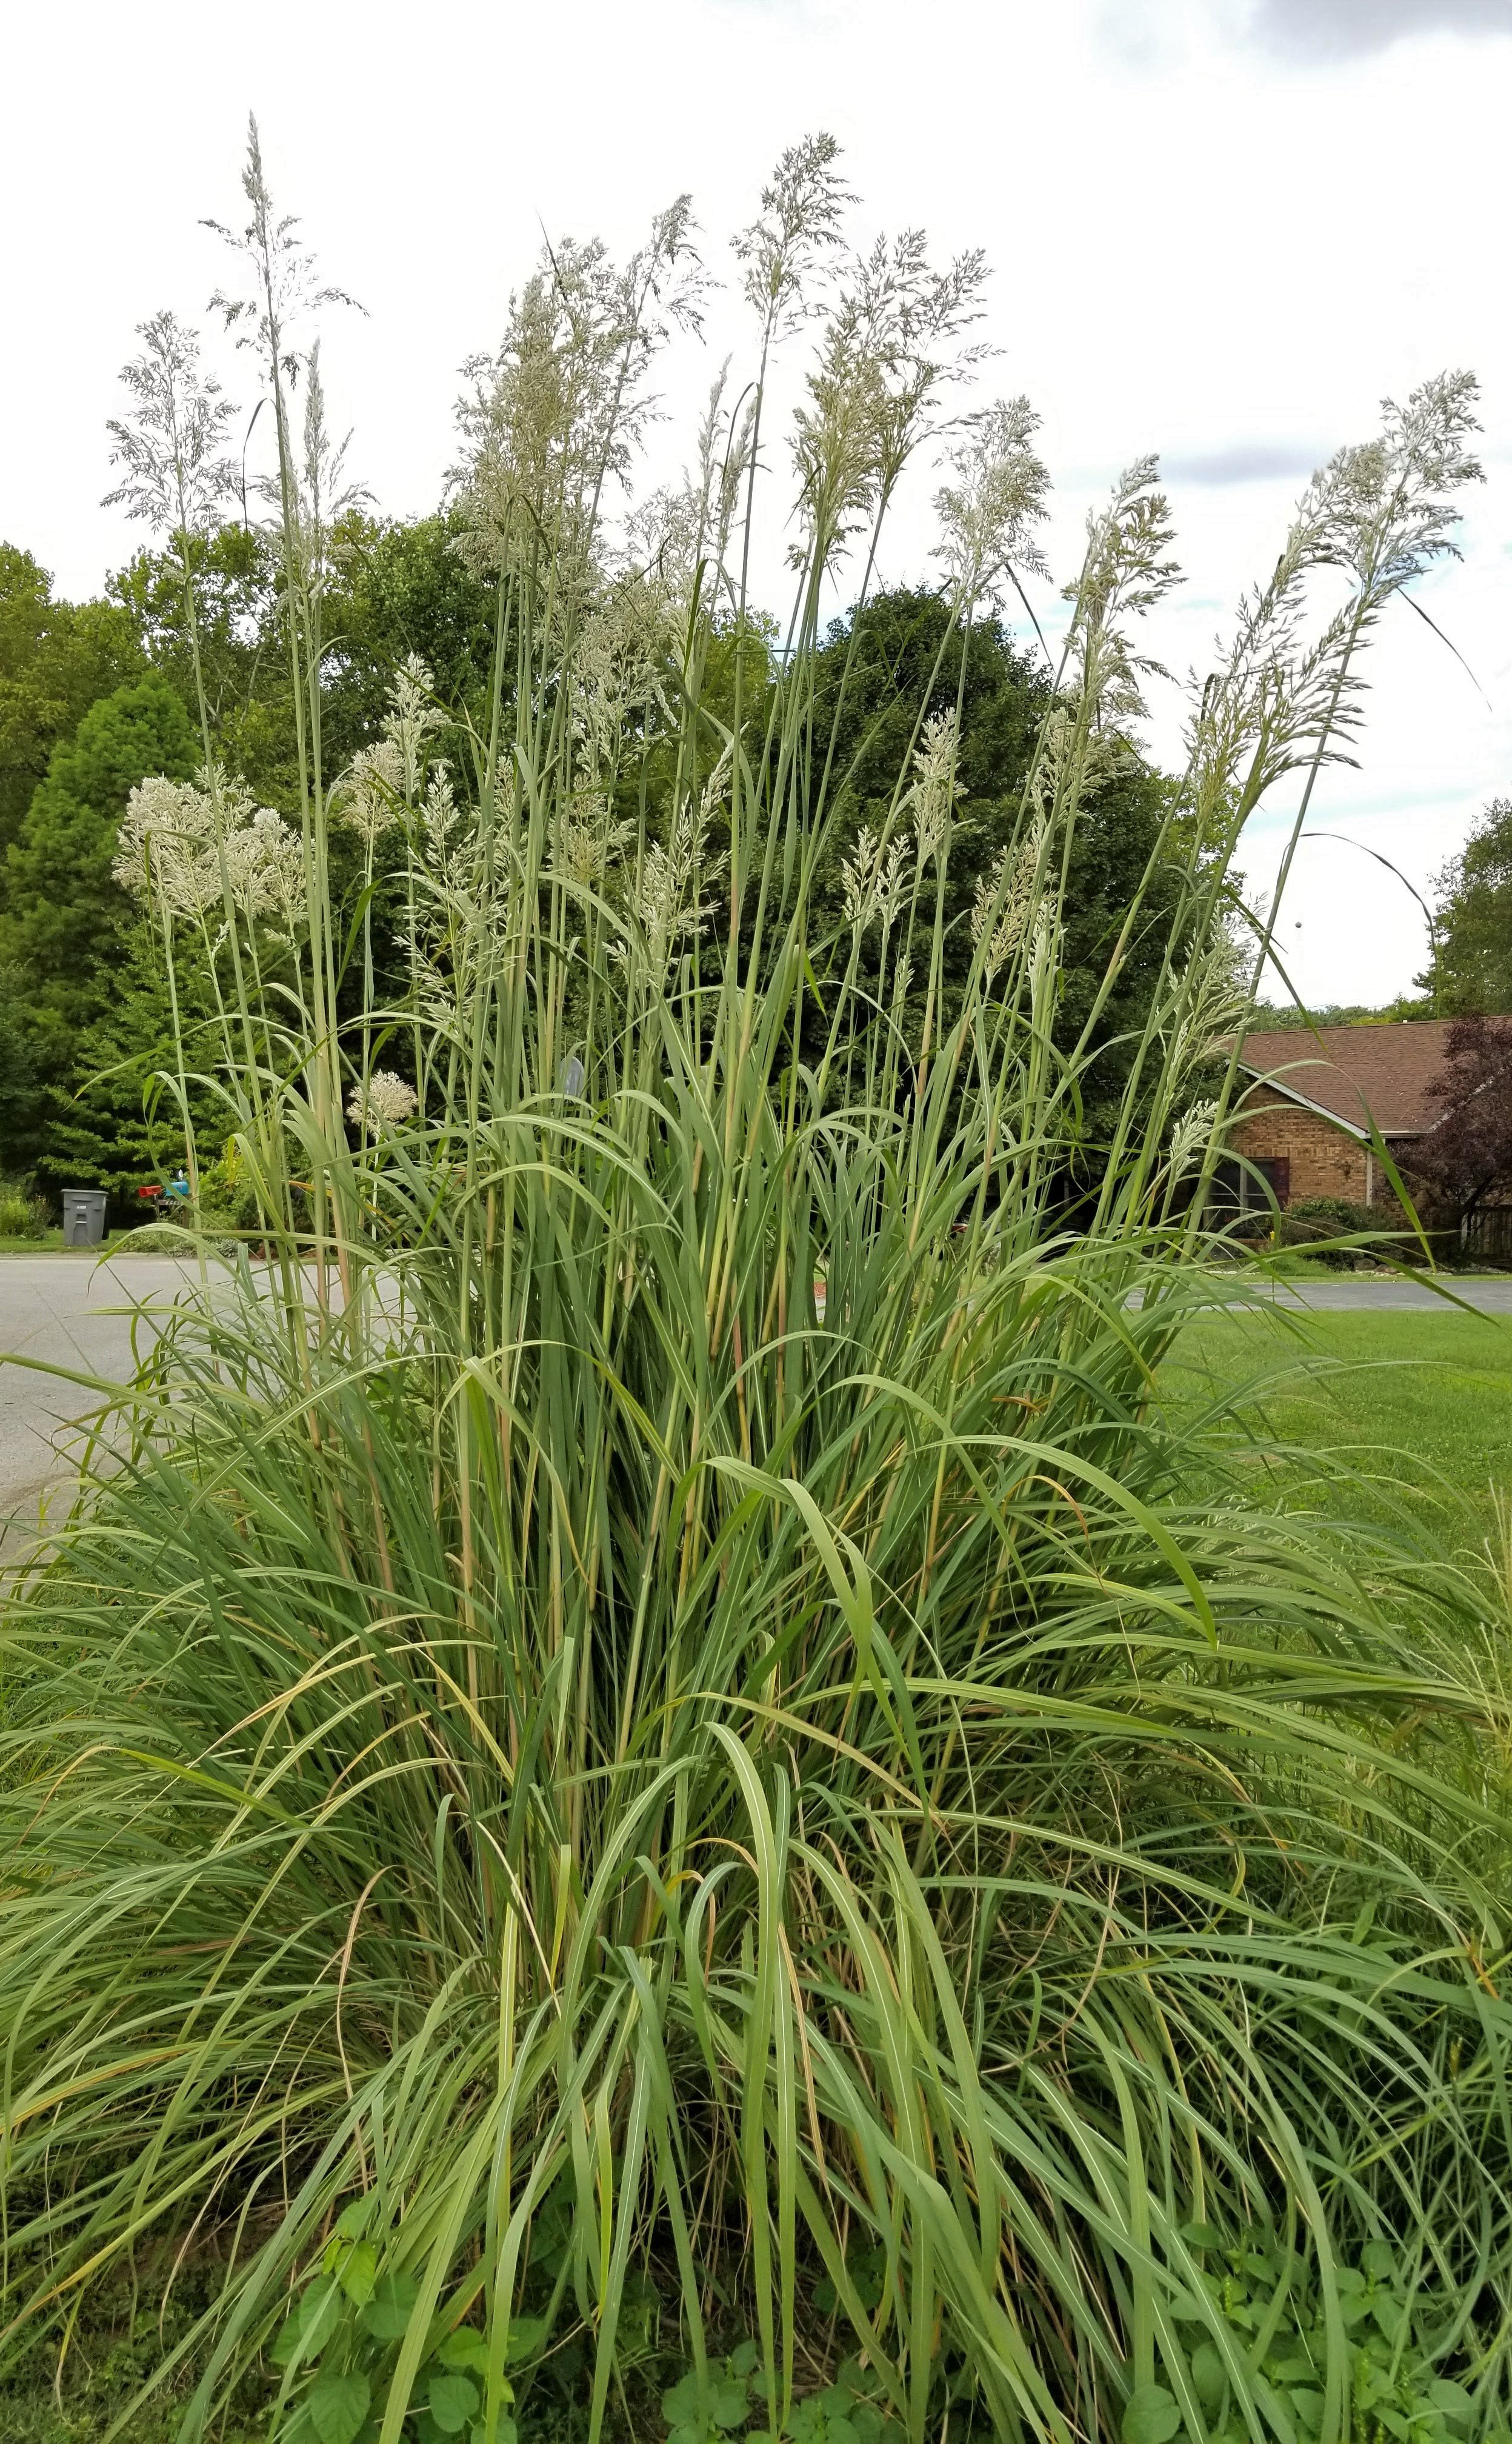 A clump of Ravenna Grass planted in a landscape